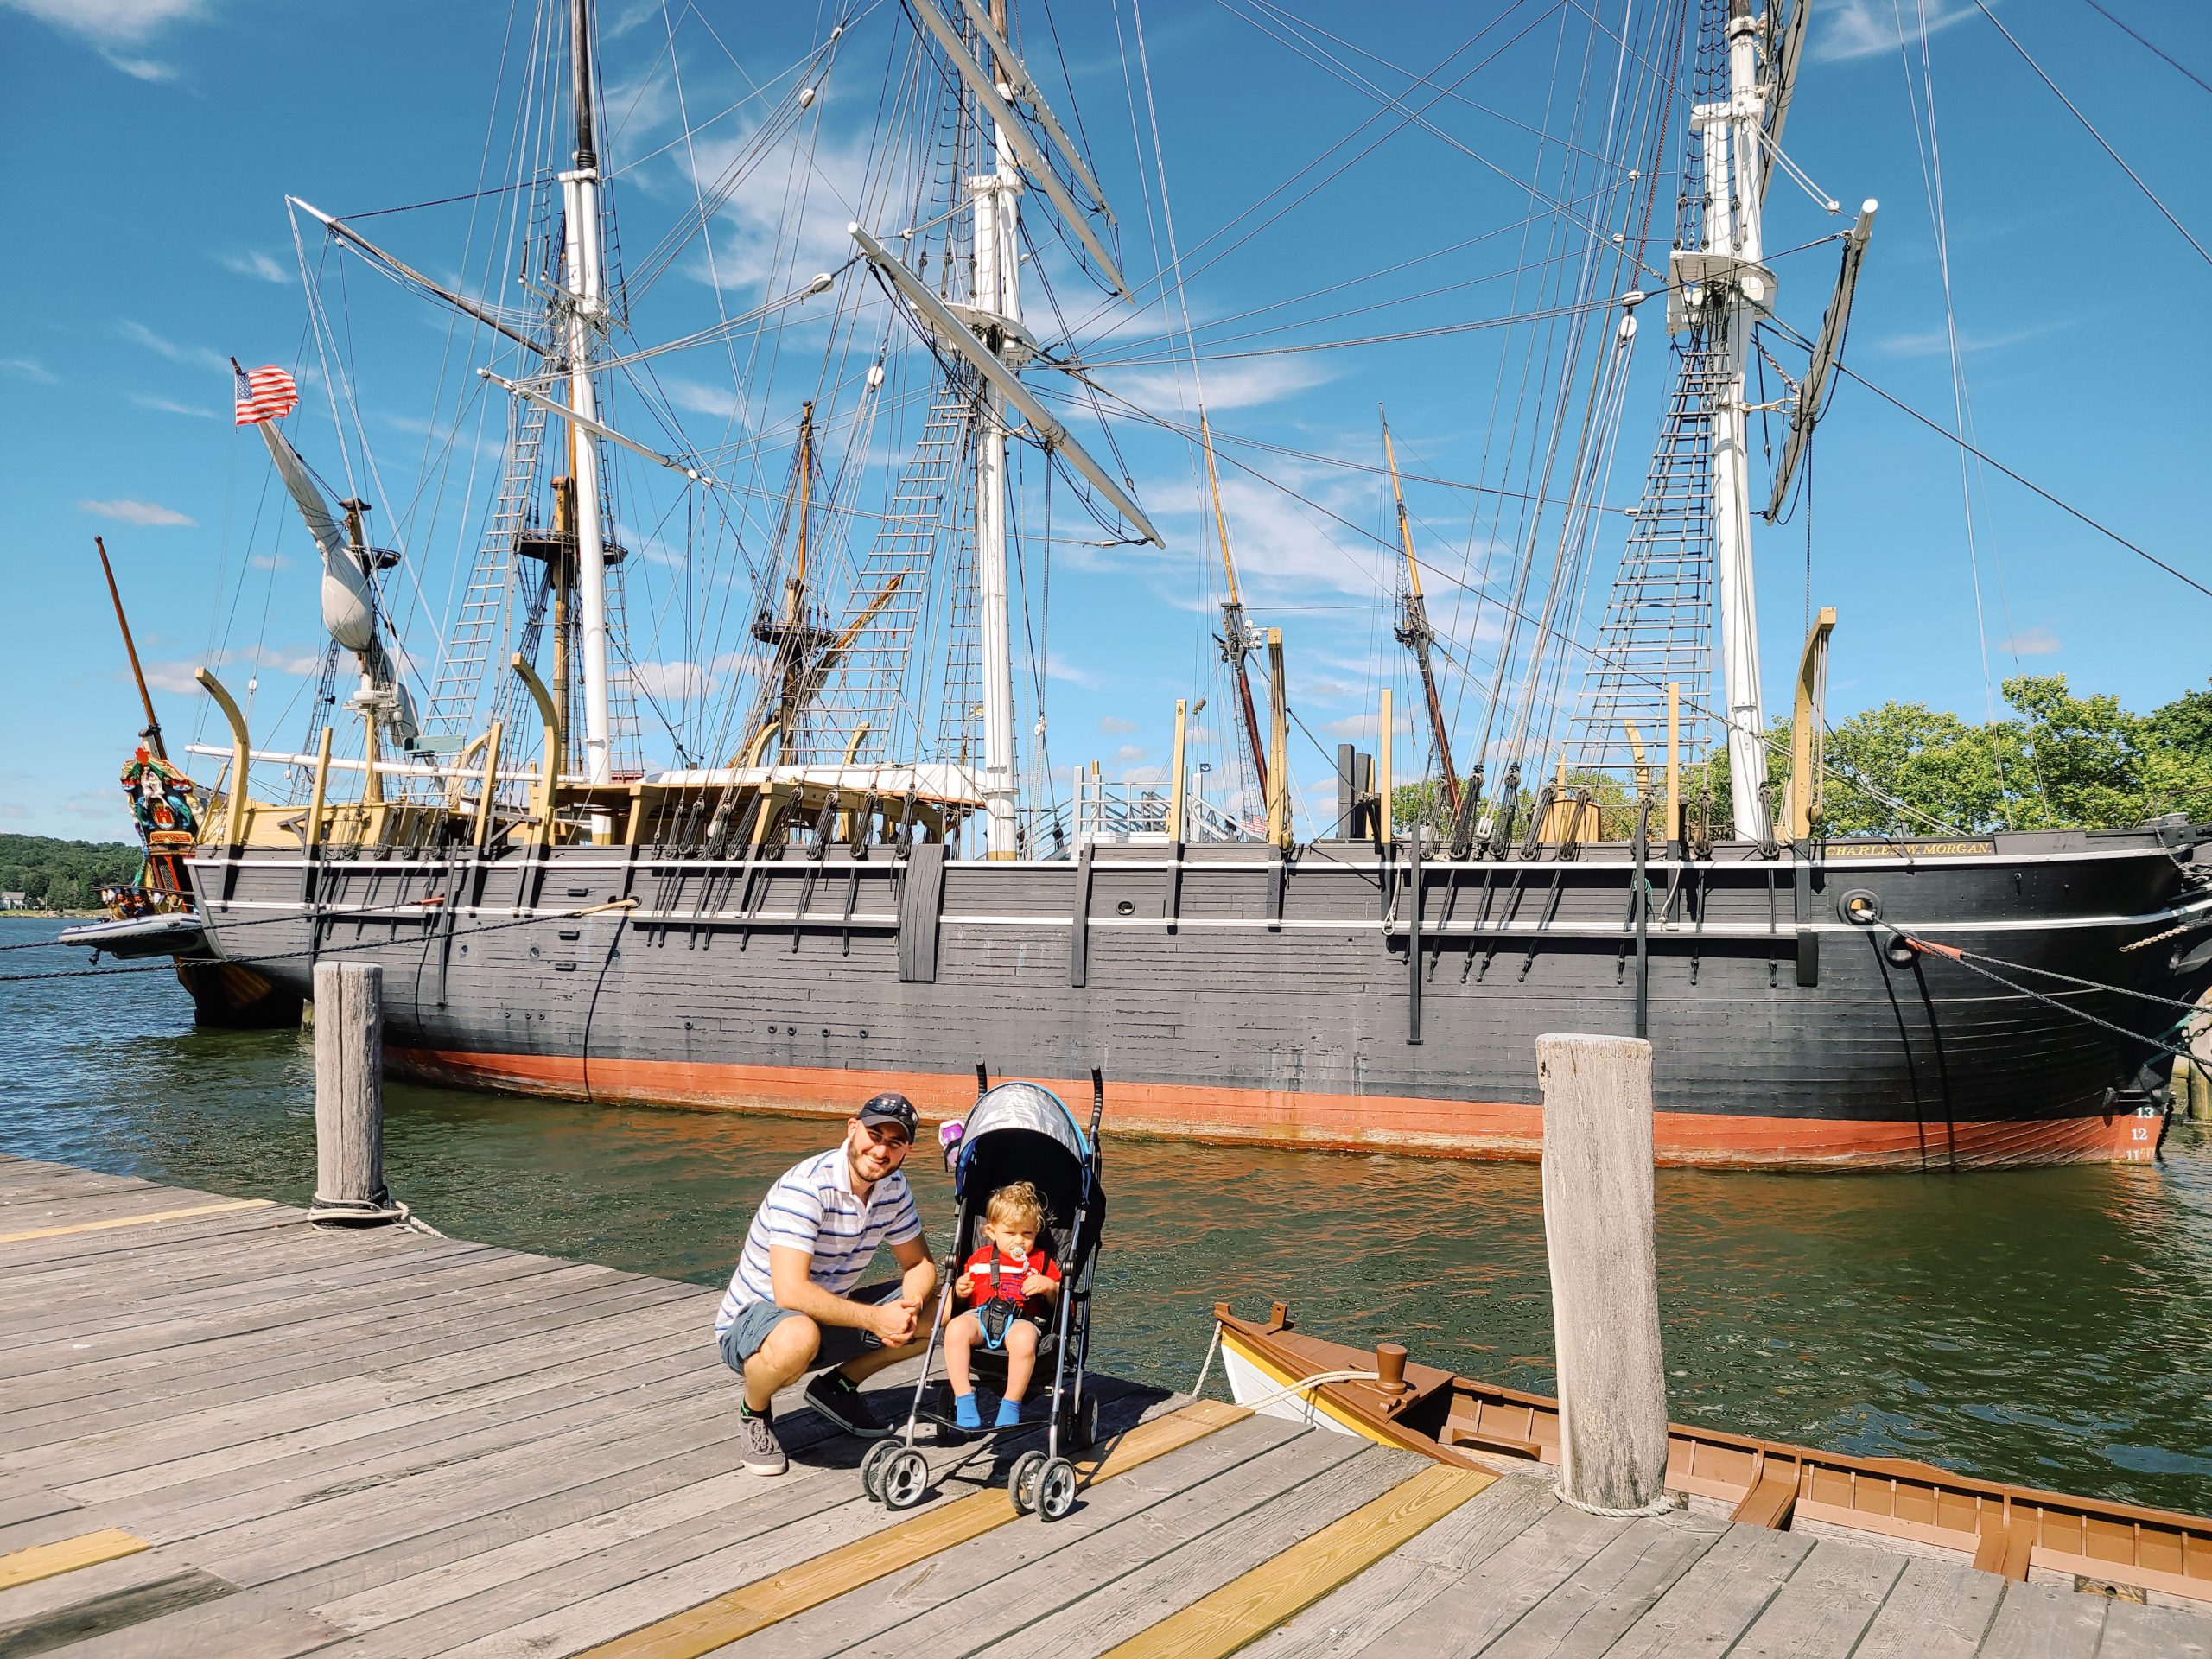 A man and child in a stroller standing on a dock posing in front of a pirate ship replica